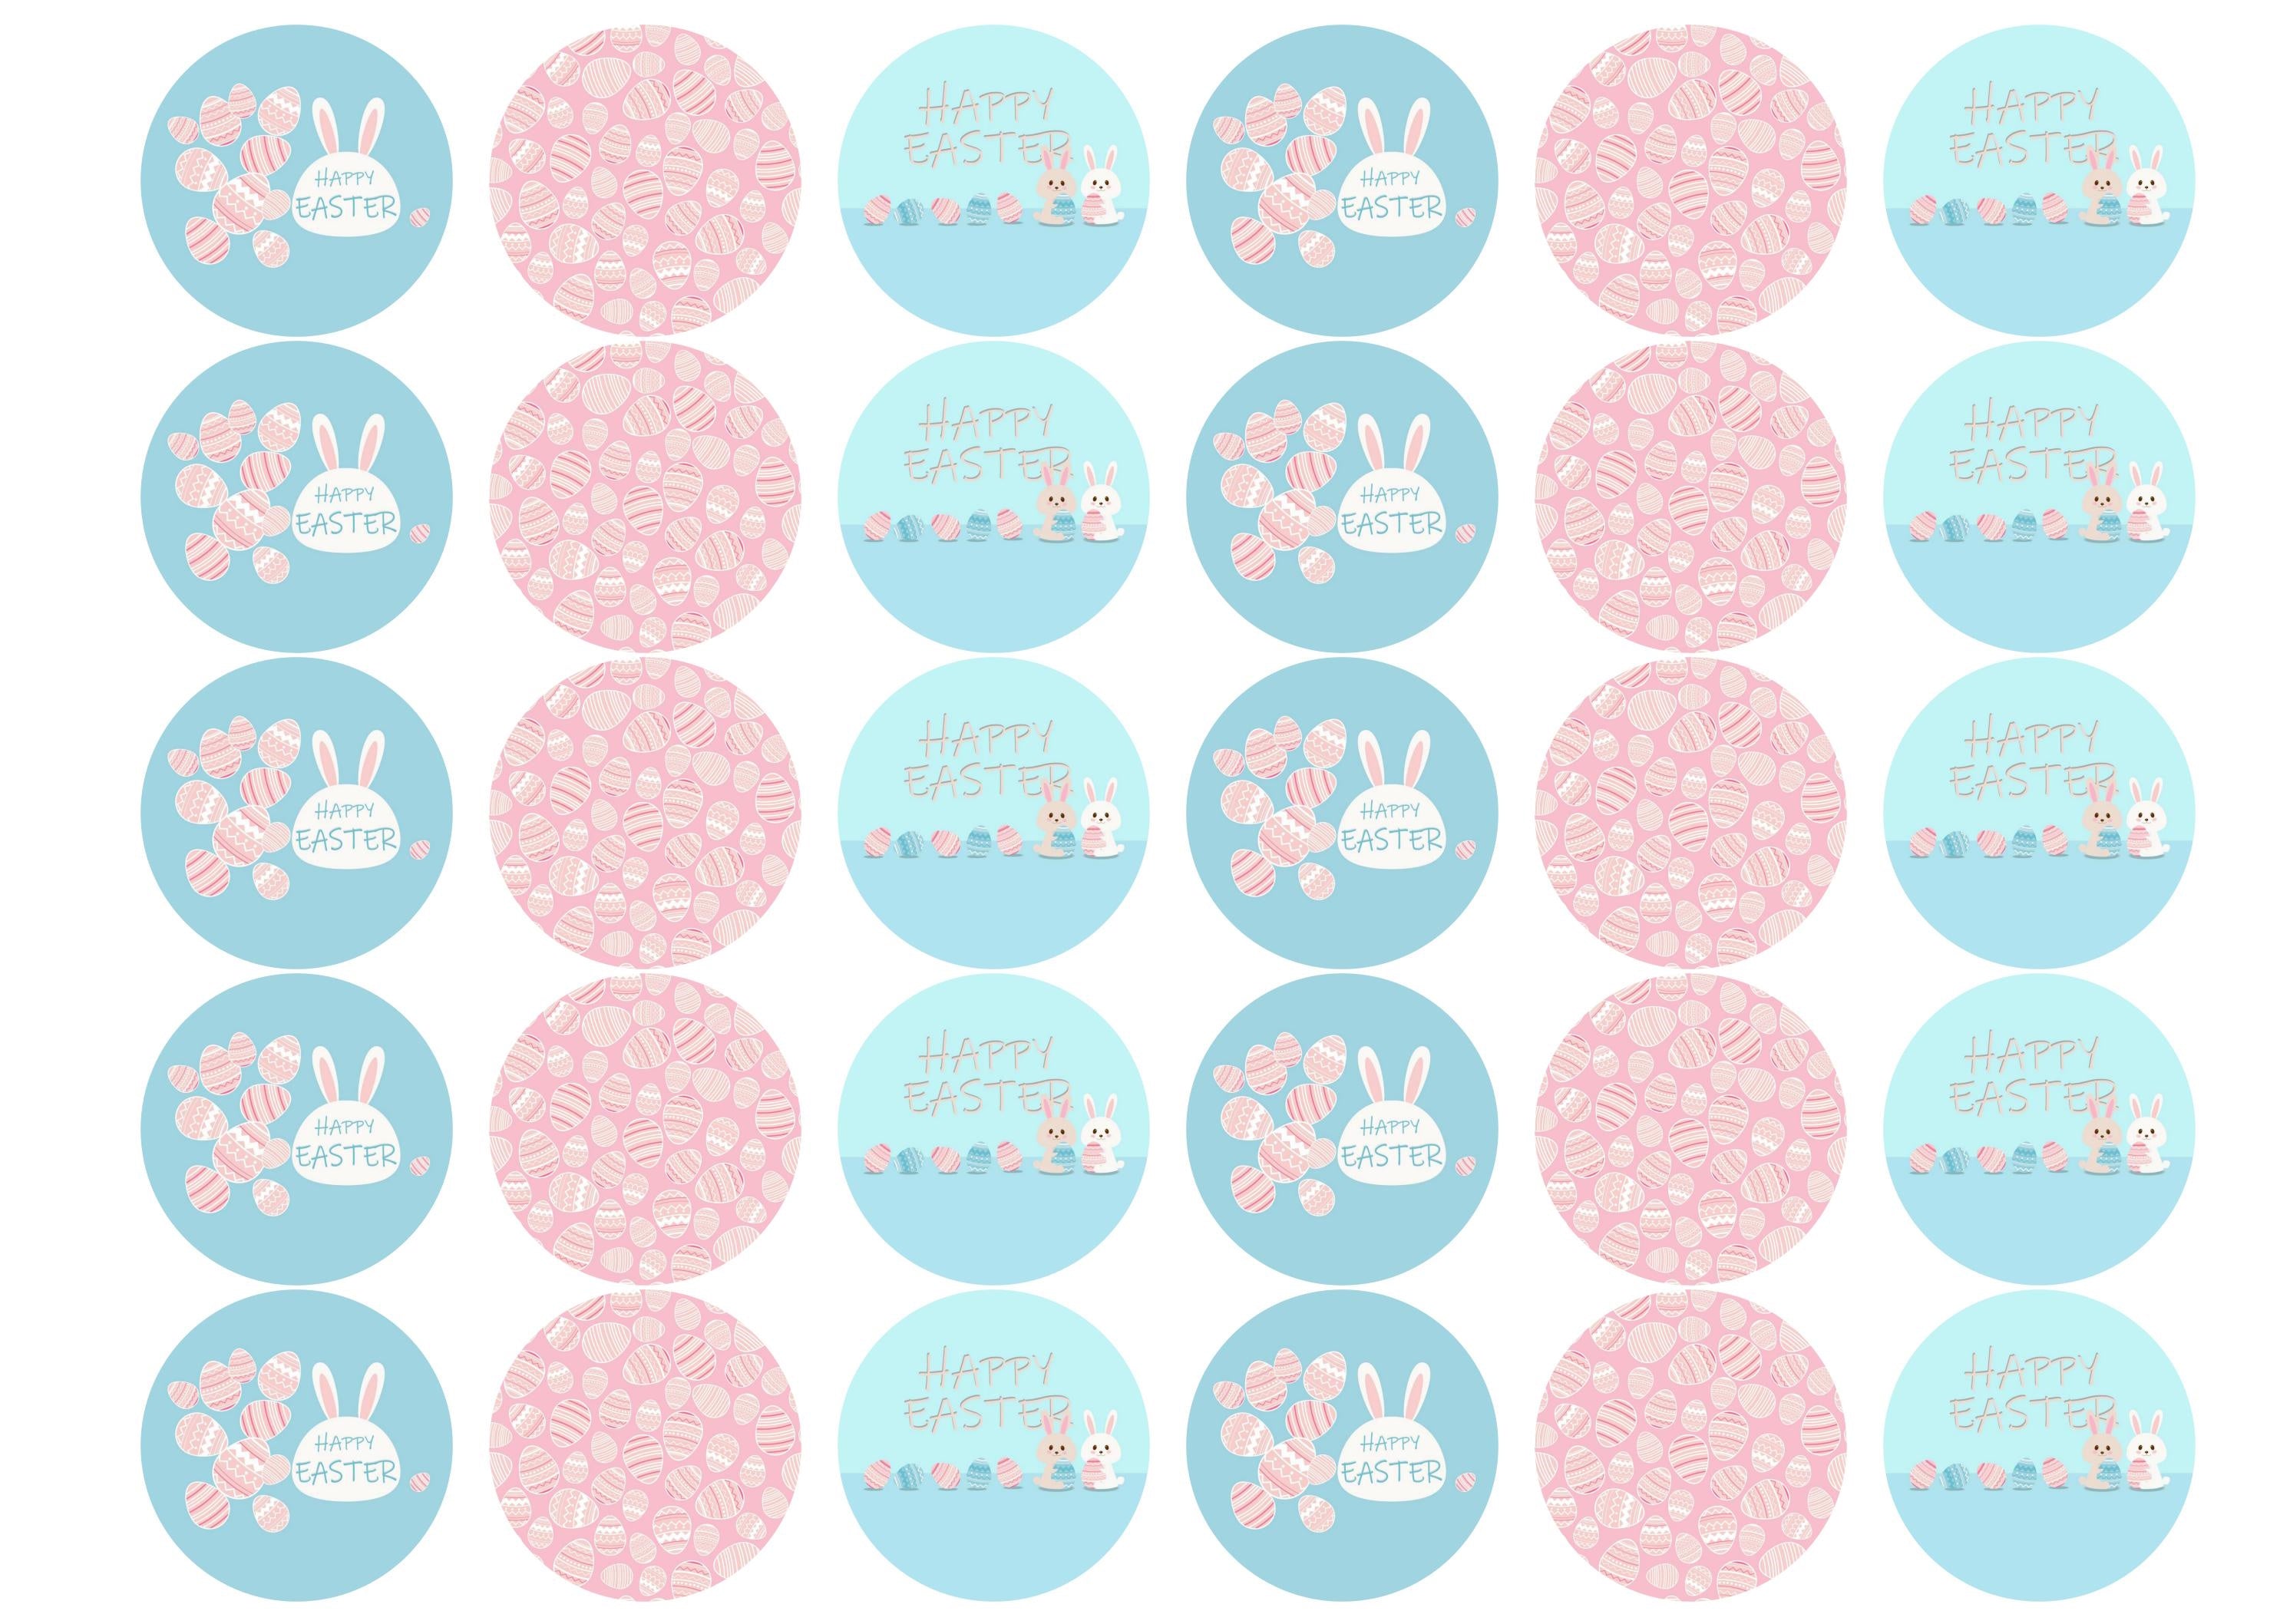 30 edible cupcake toppers with Happy Easter Bunnies